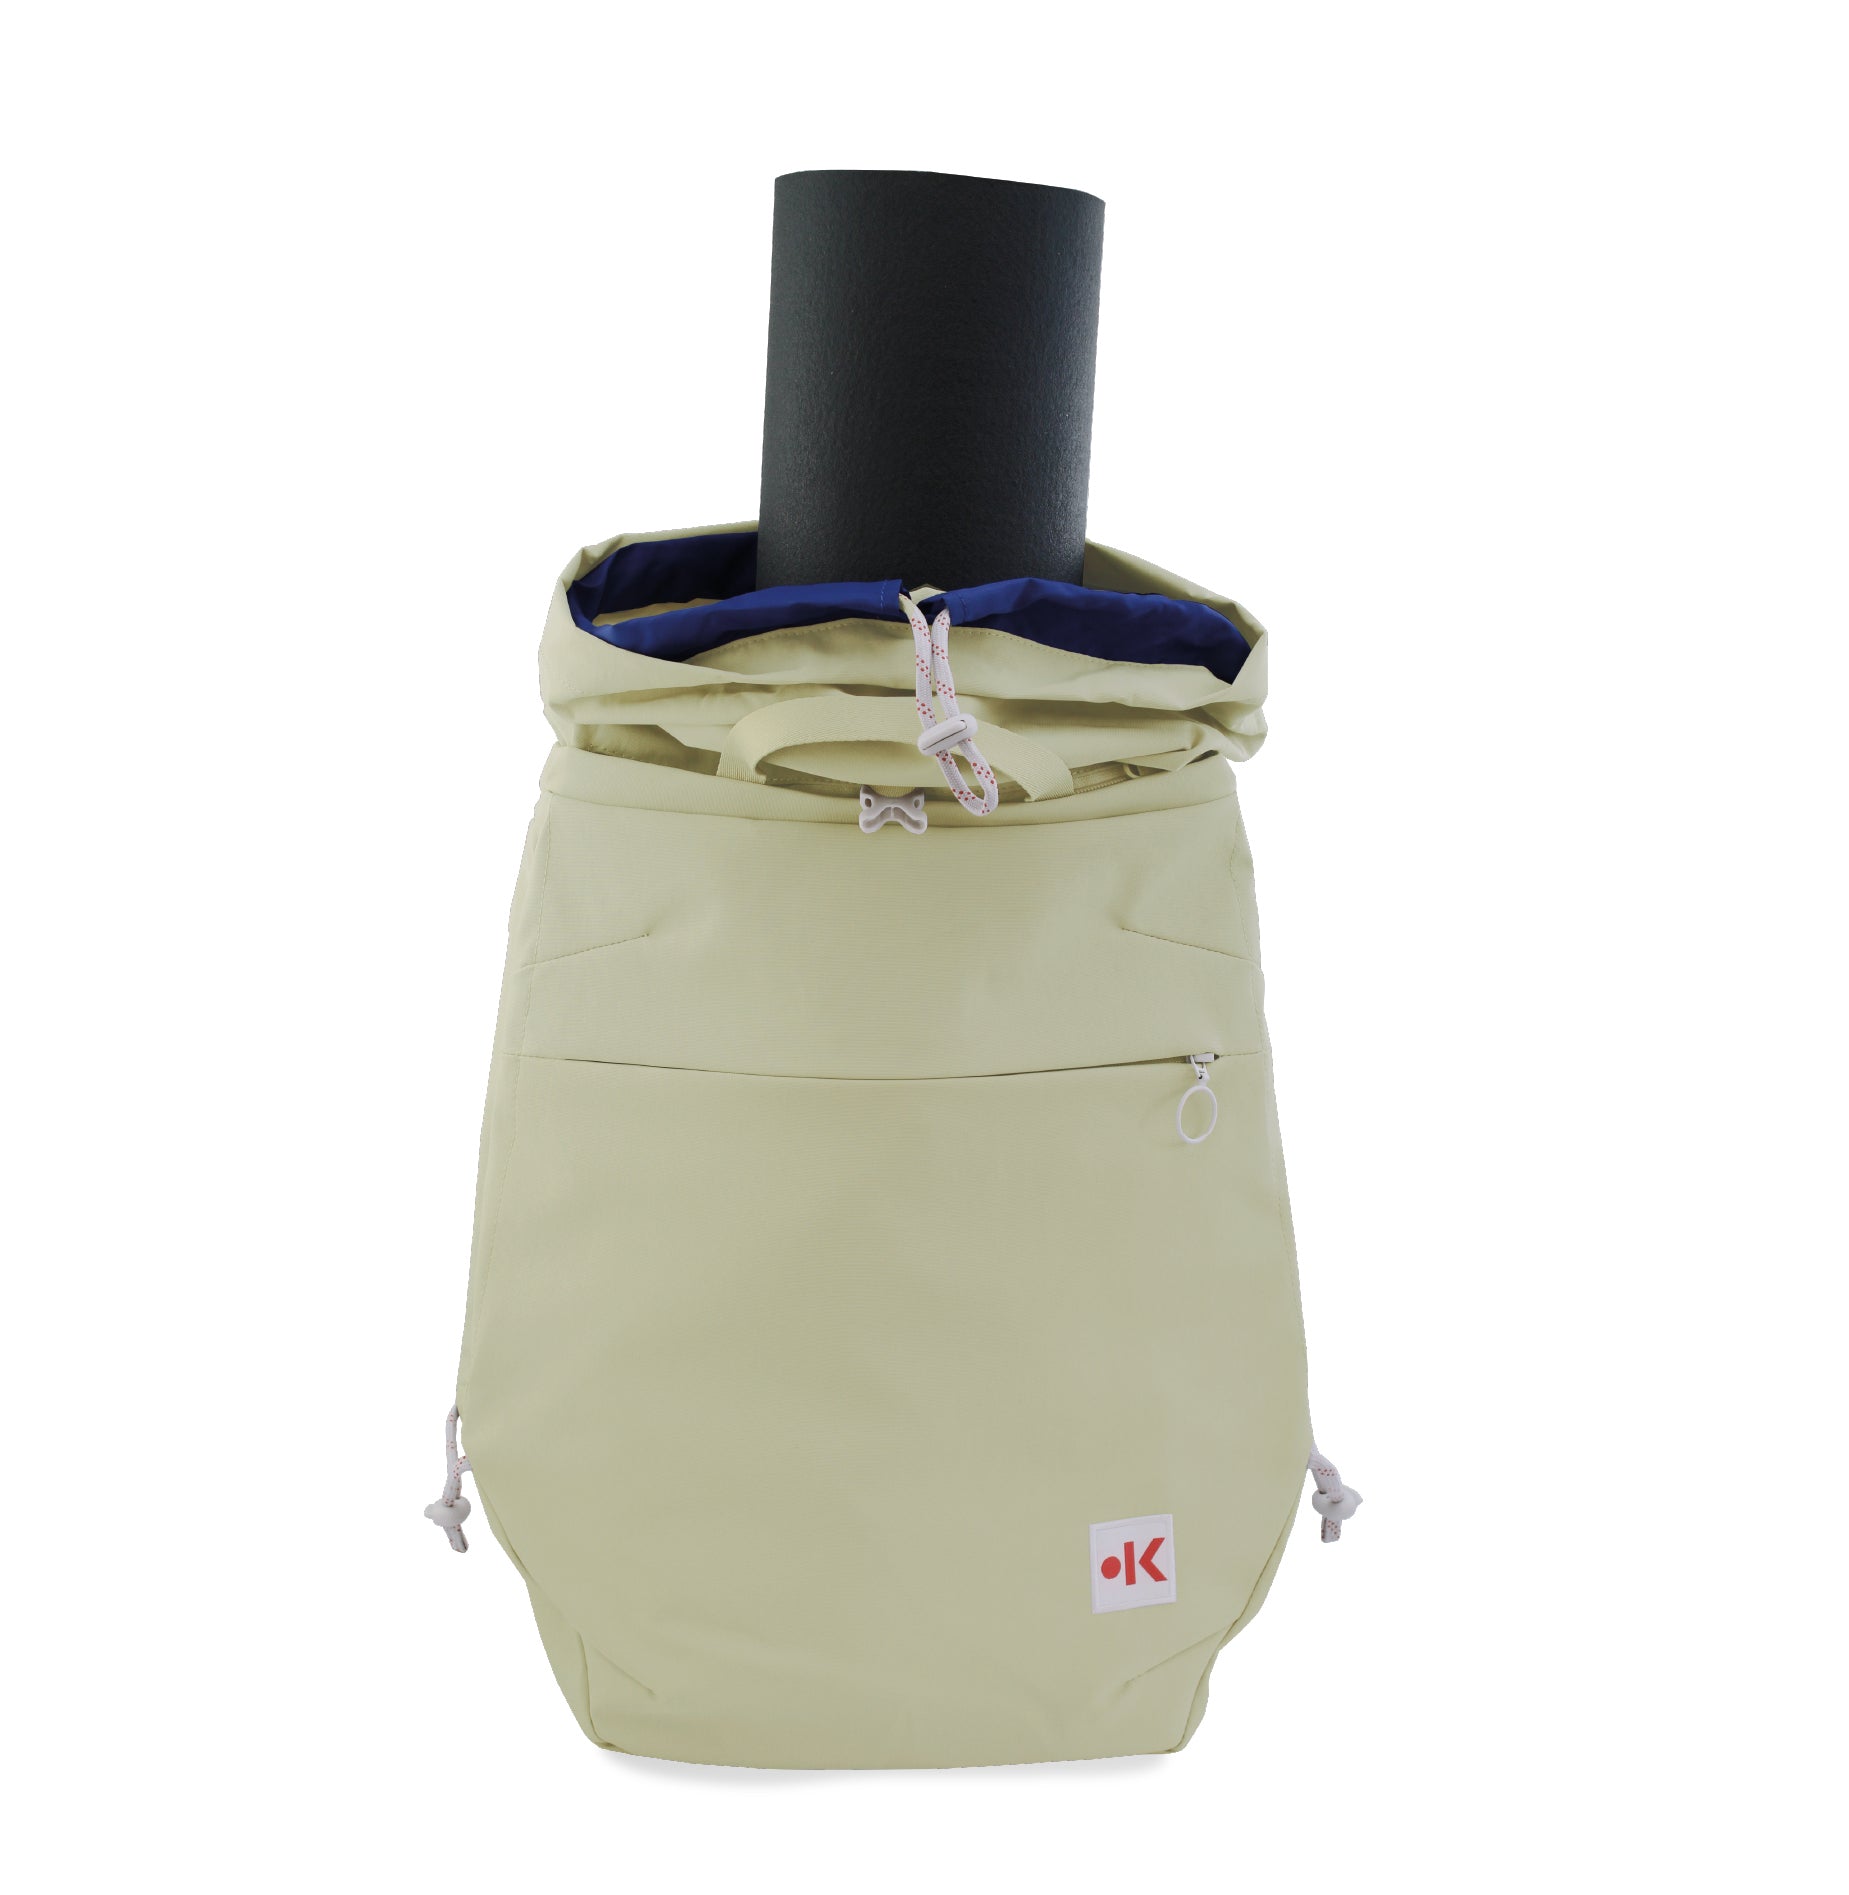 Yoga backpack – AIMO - pale olive